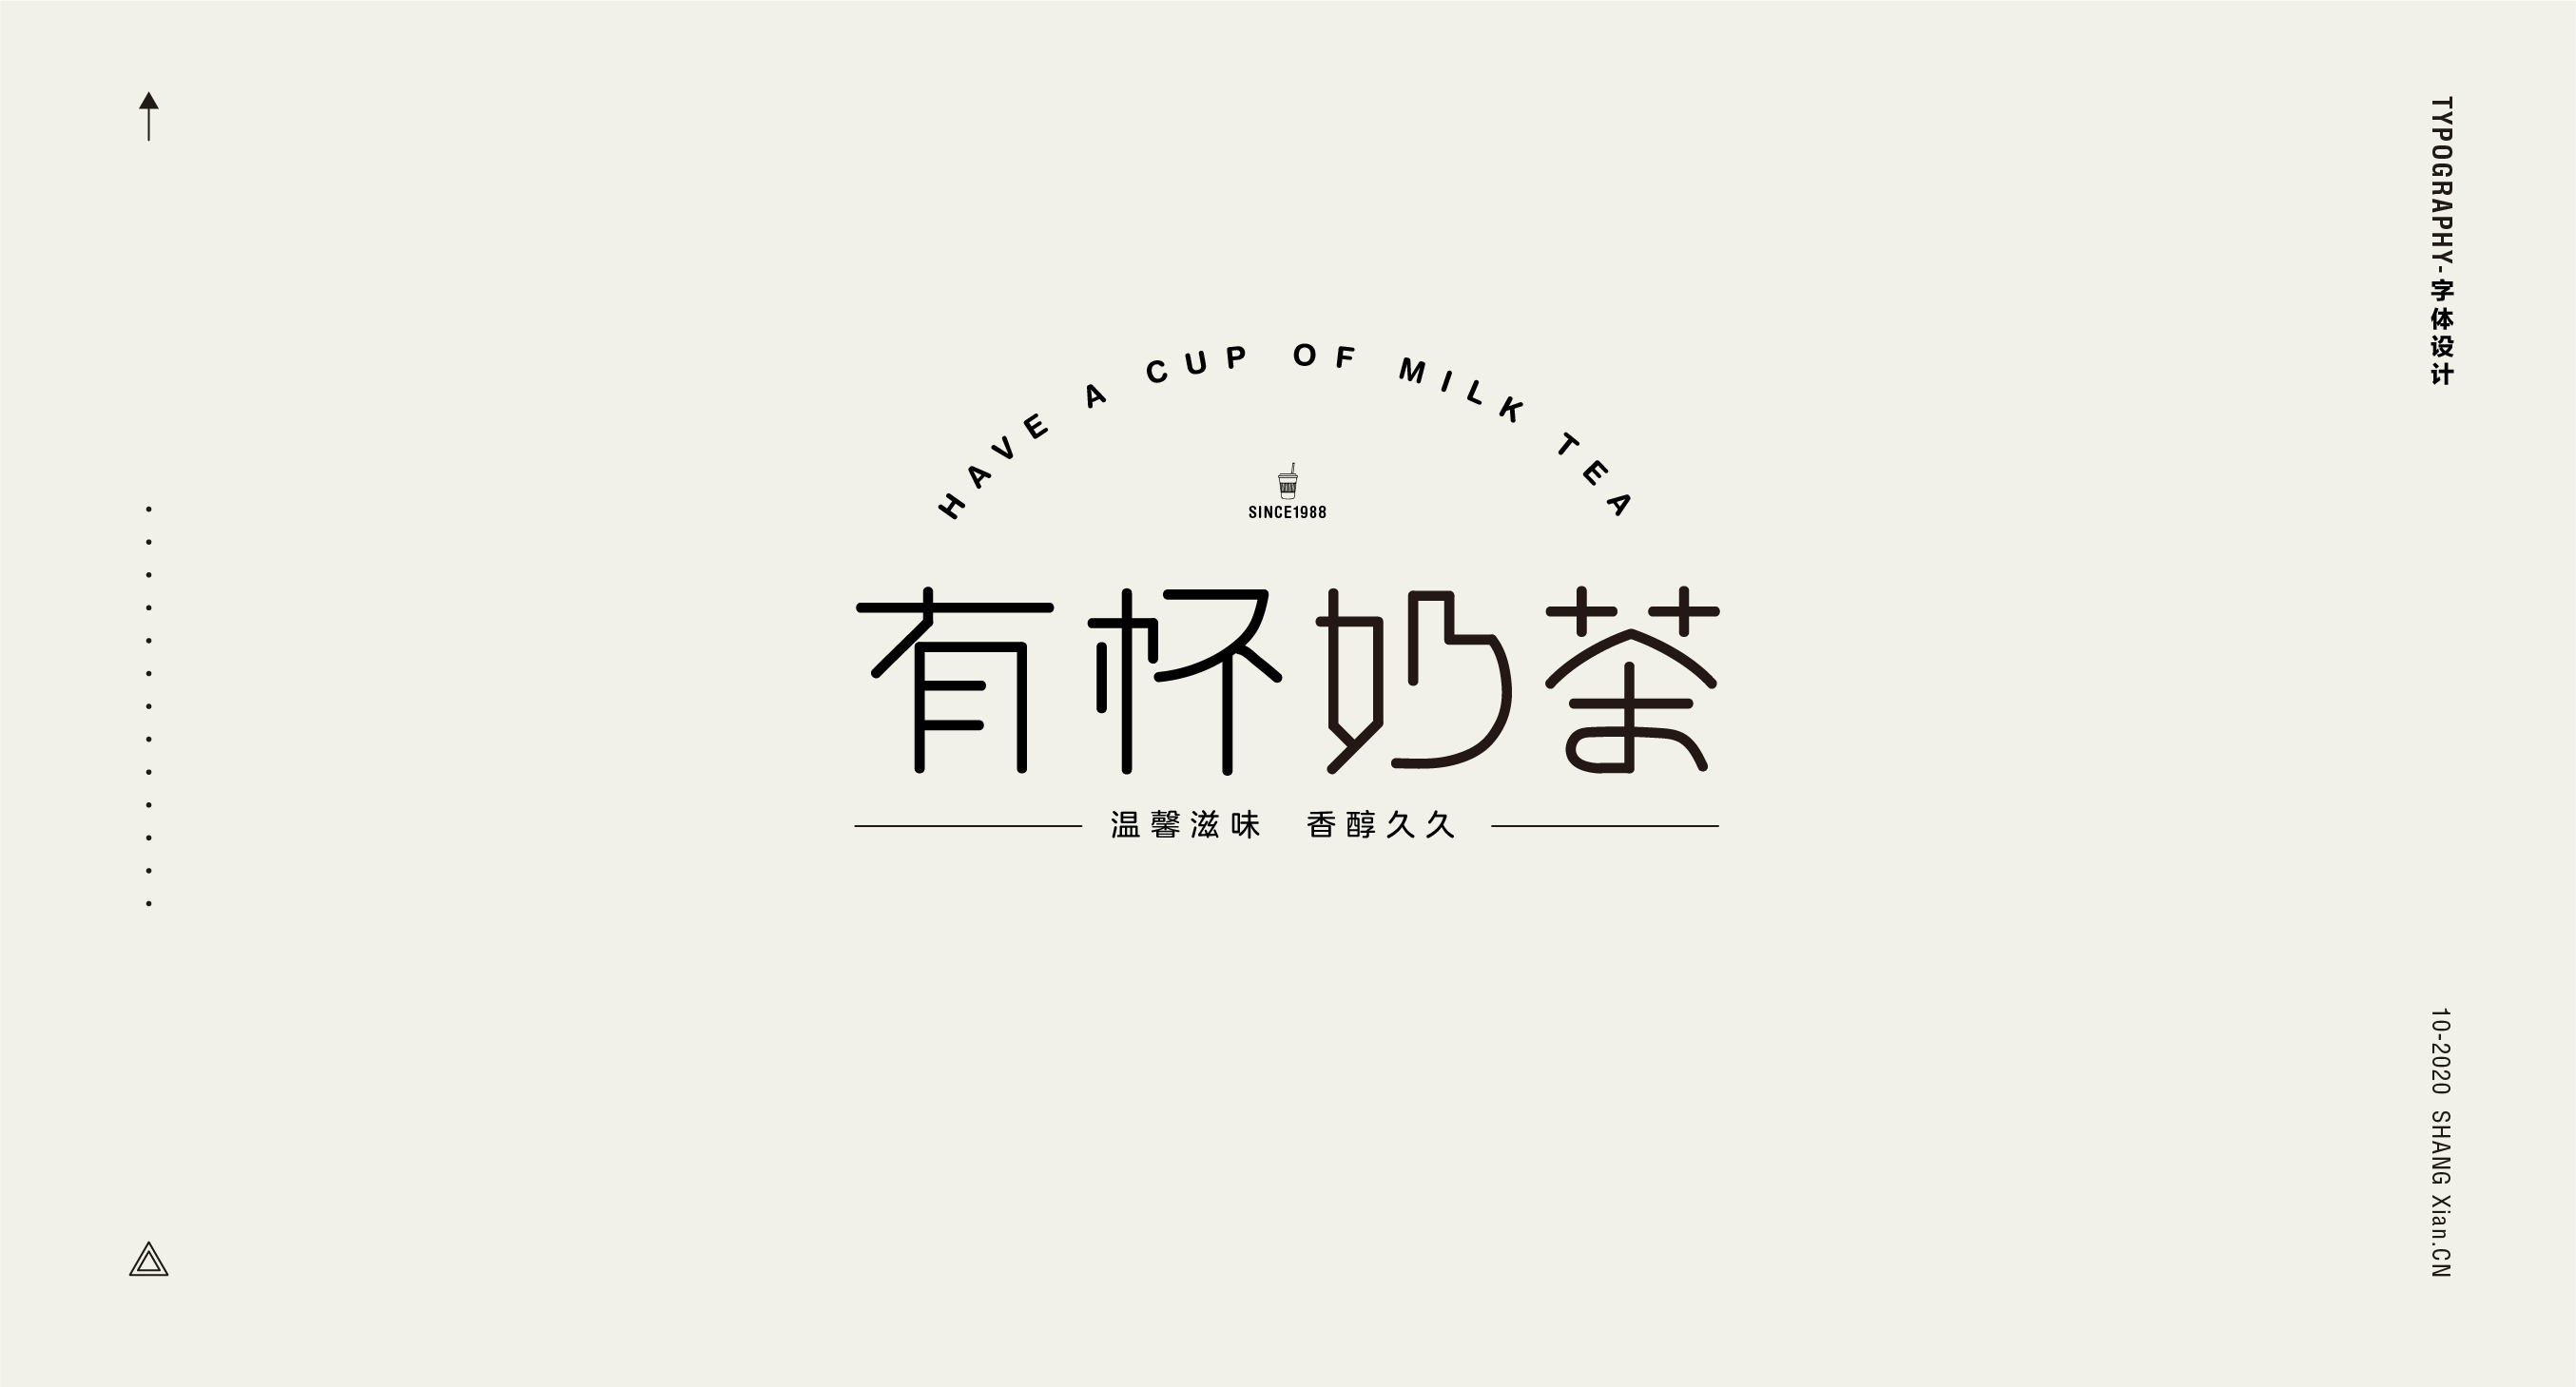 39P Chinese font design collection inspiration #.201